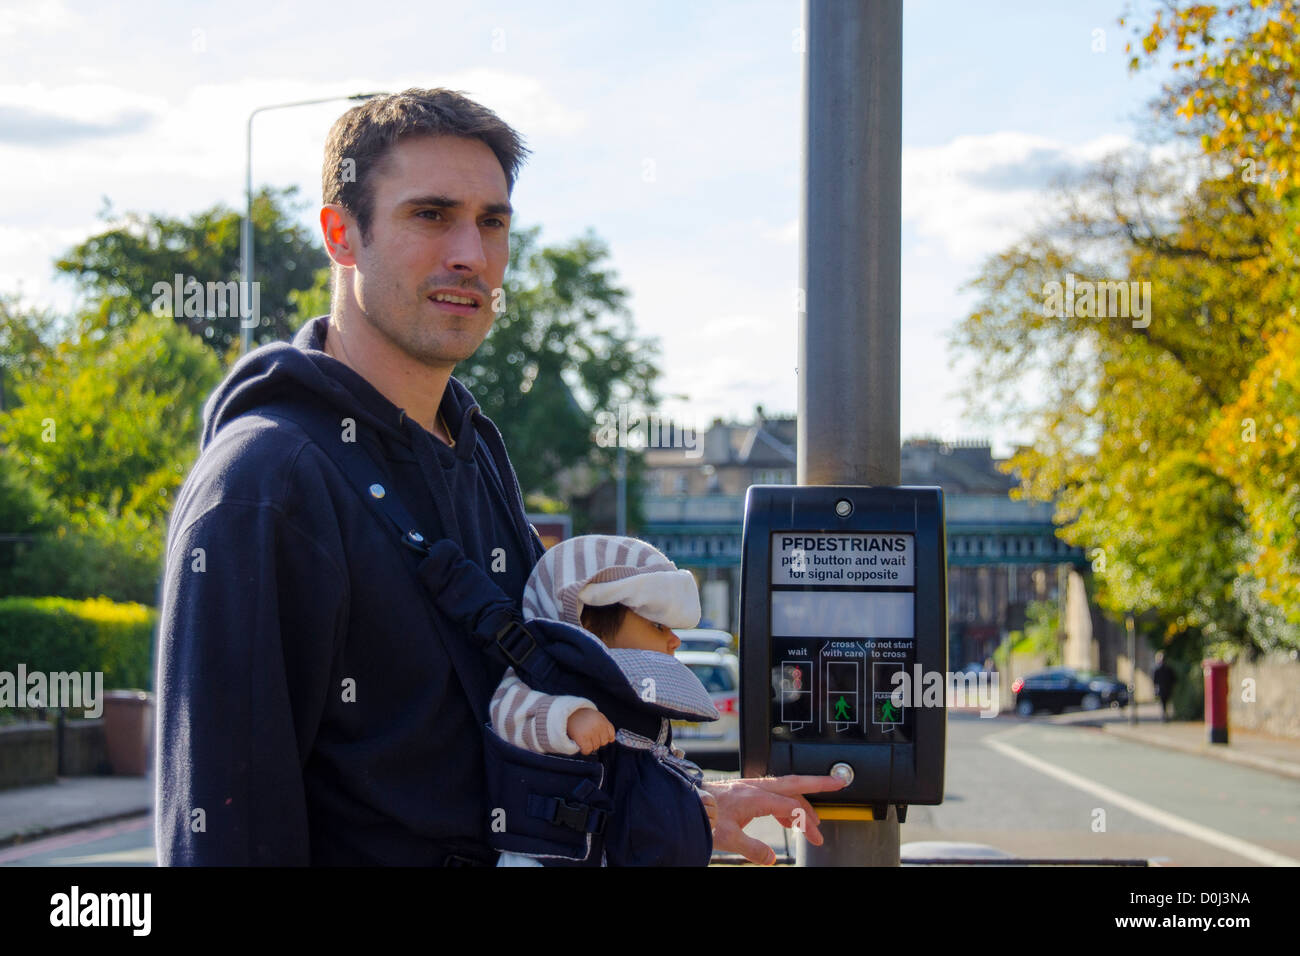 Dad with baby in carrier crossing road using pedestrian crossing, Edinburgh, UK Stock Photo